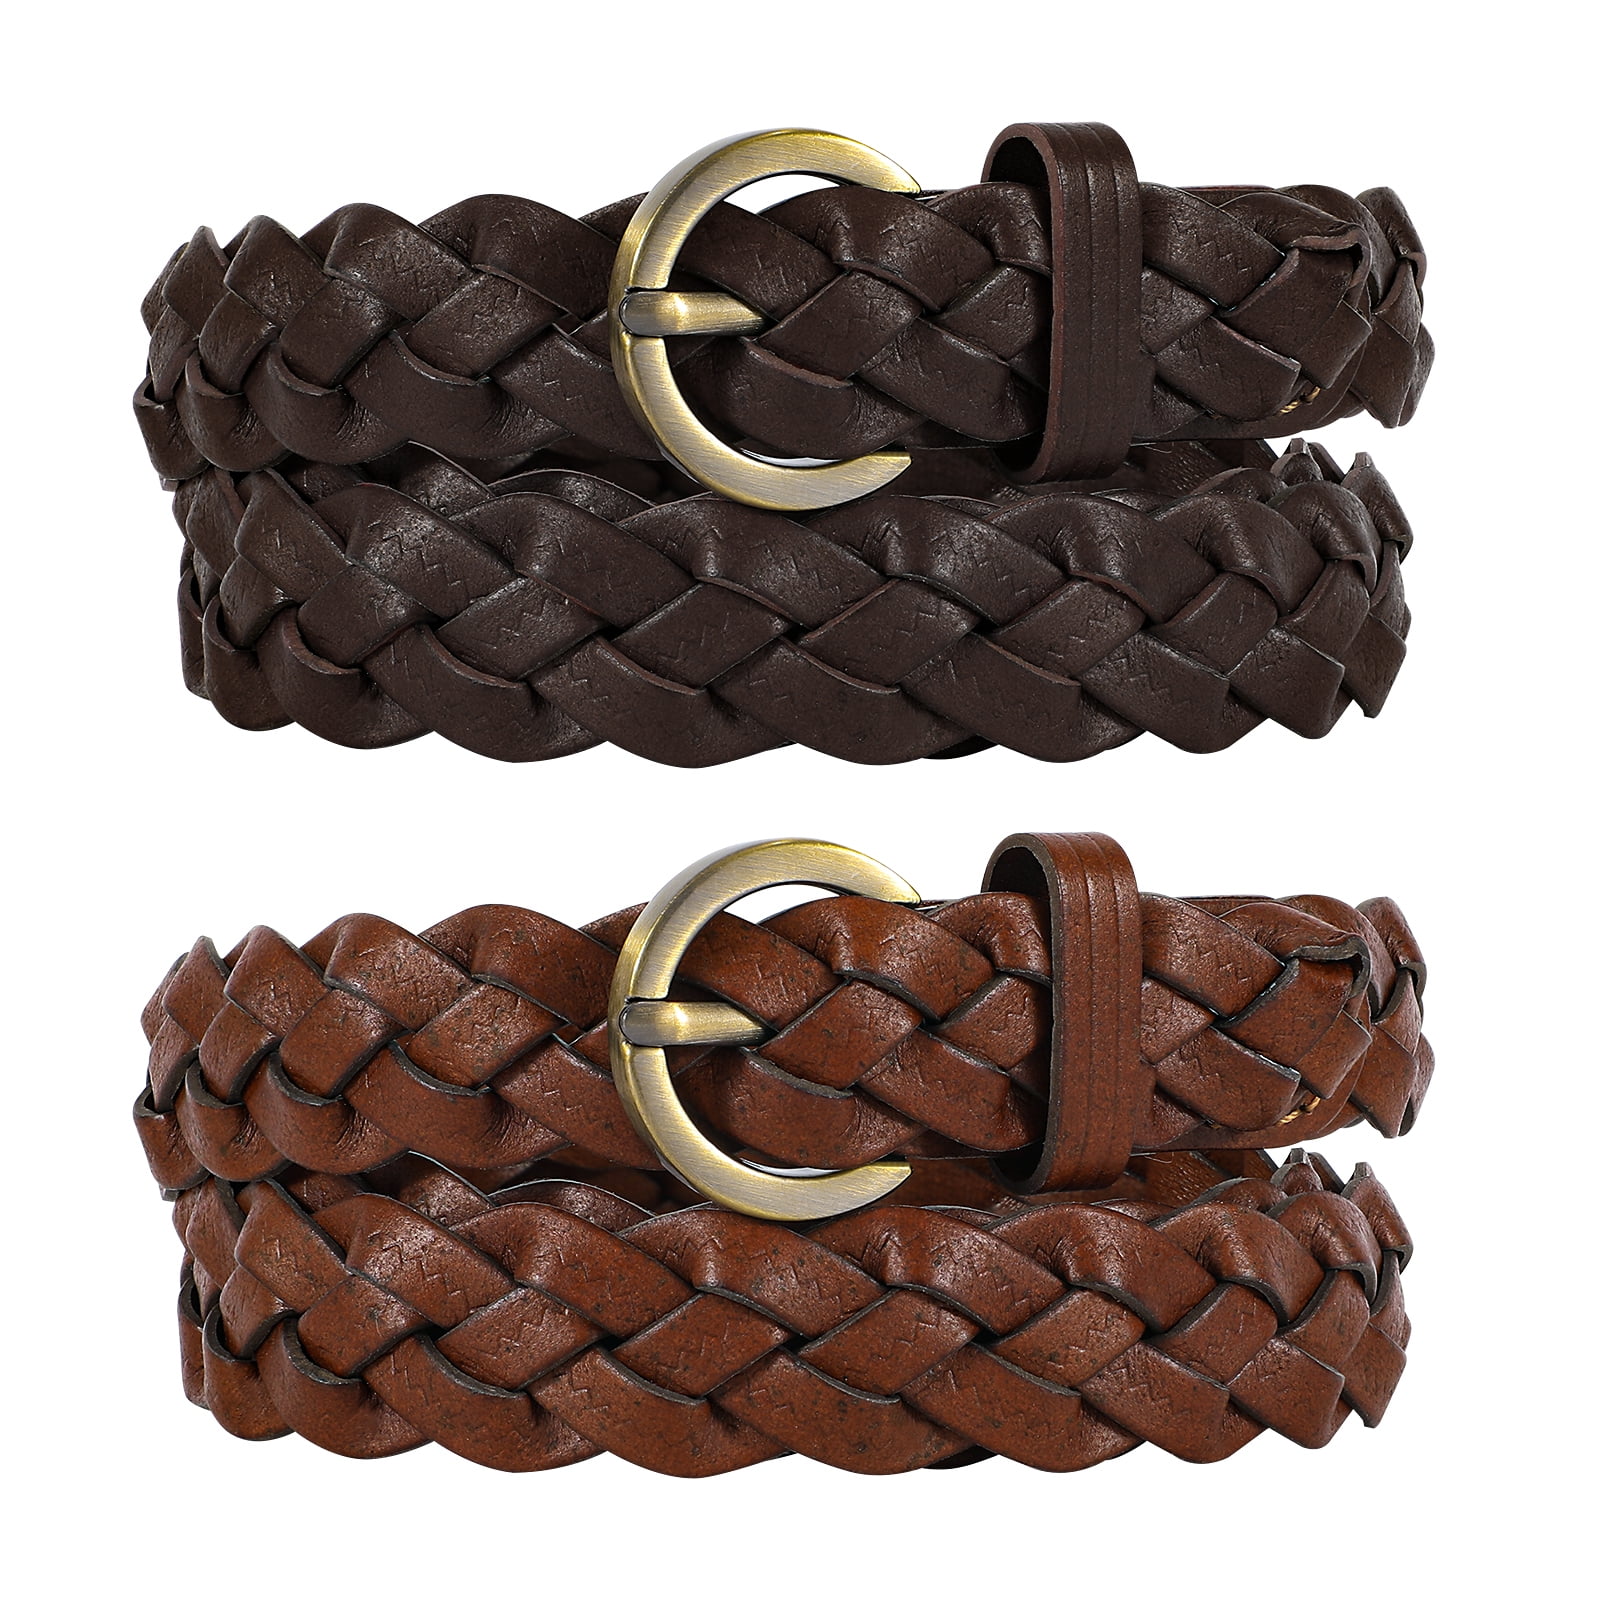 WHIPPY Women's Leather Braided Belts, Woven Skinny Belts for Jeans ...